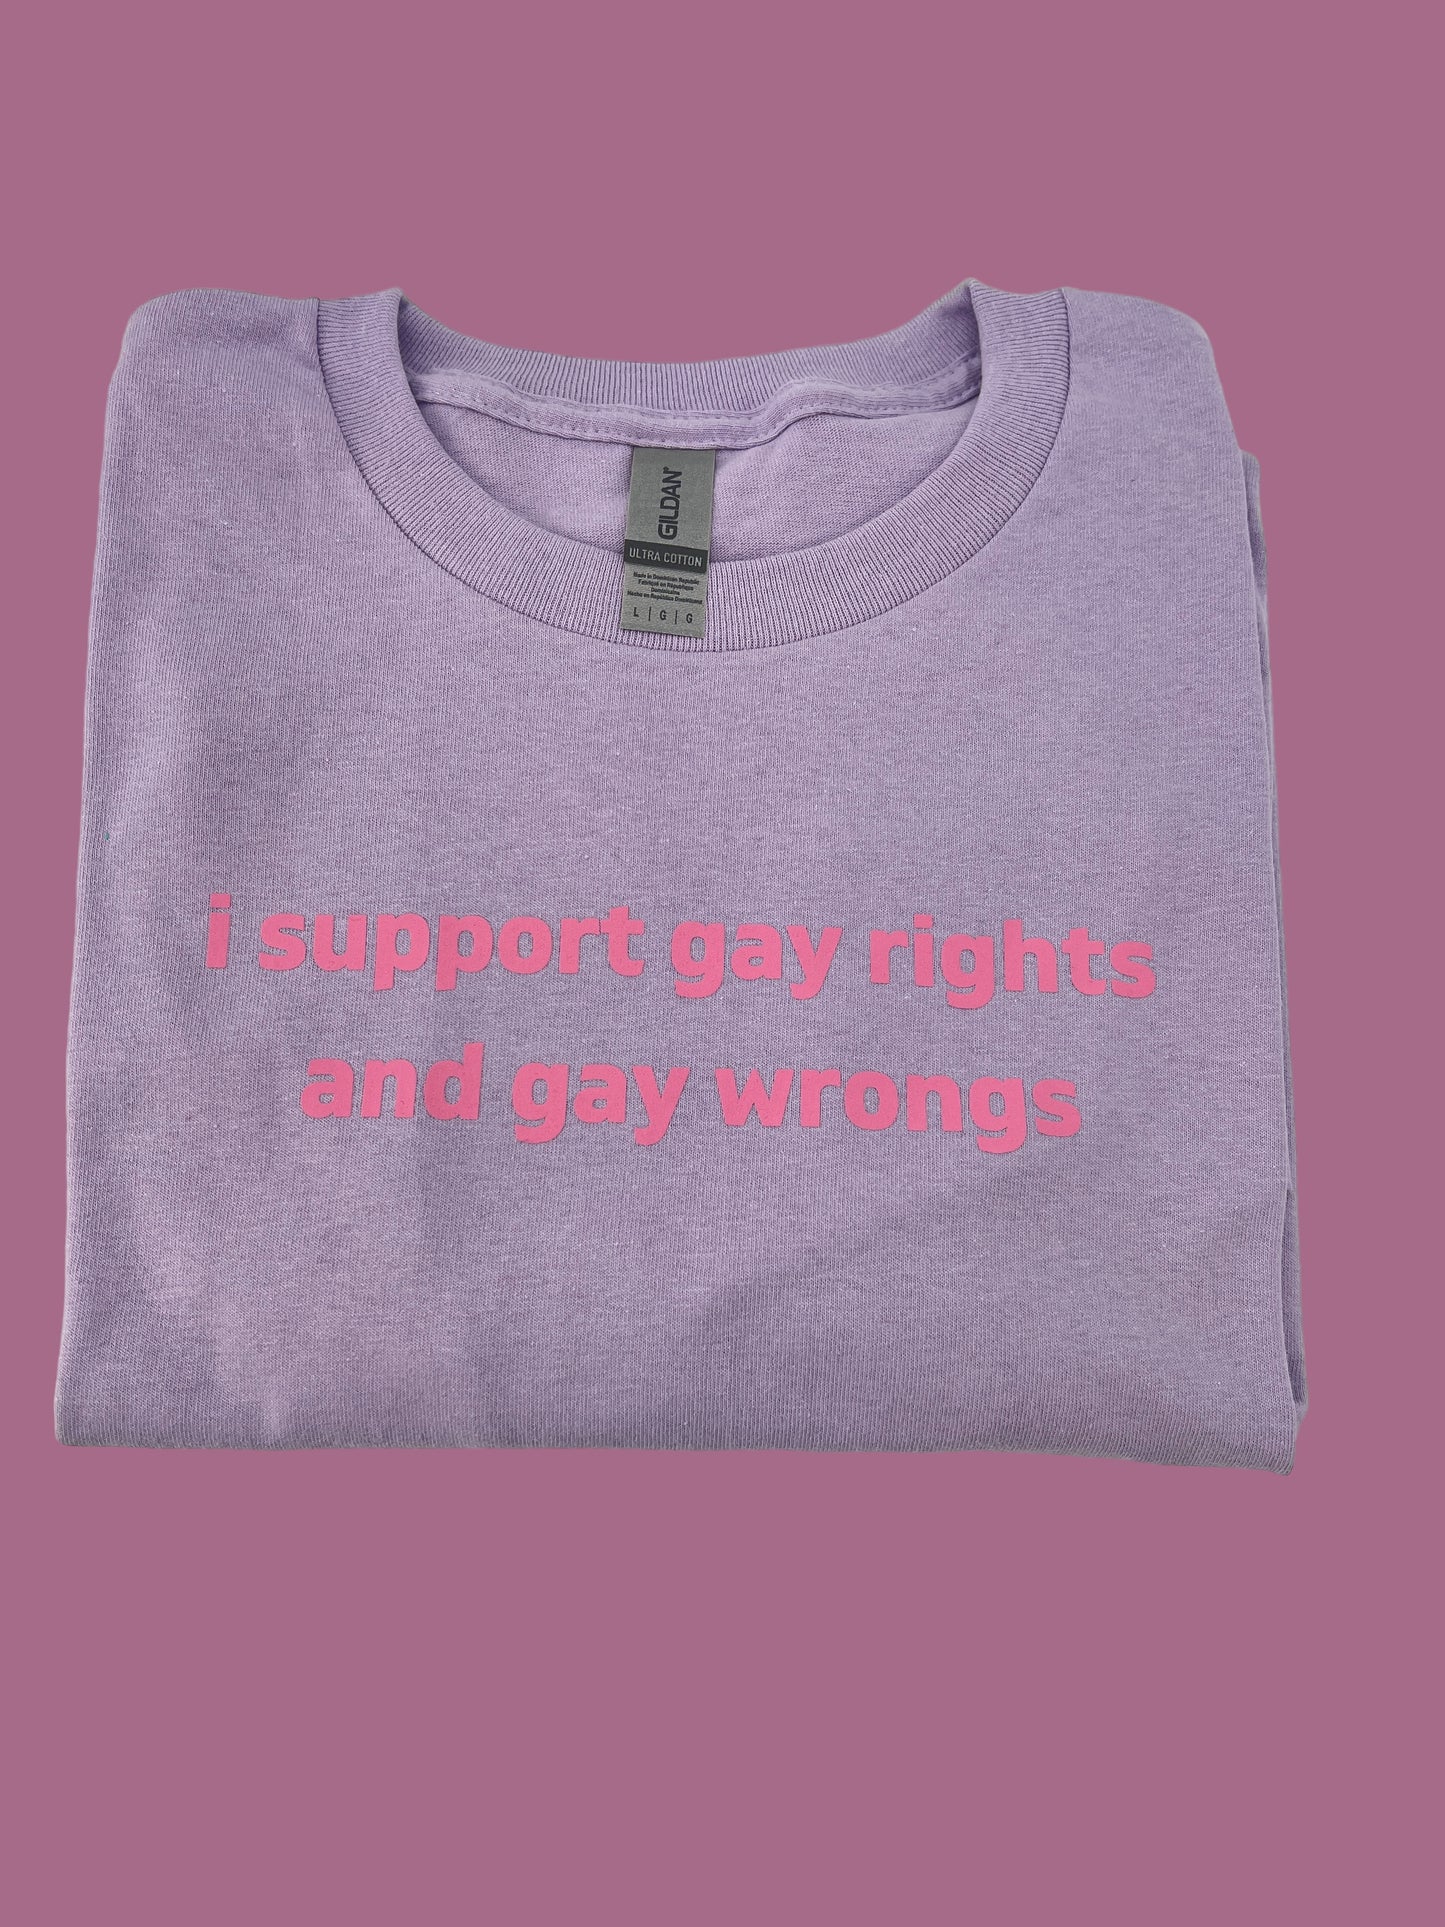 I Support Gay Rights and Gay Wrongs Unisex T-Shirt or Crewneck  Sweatshirt